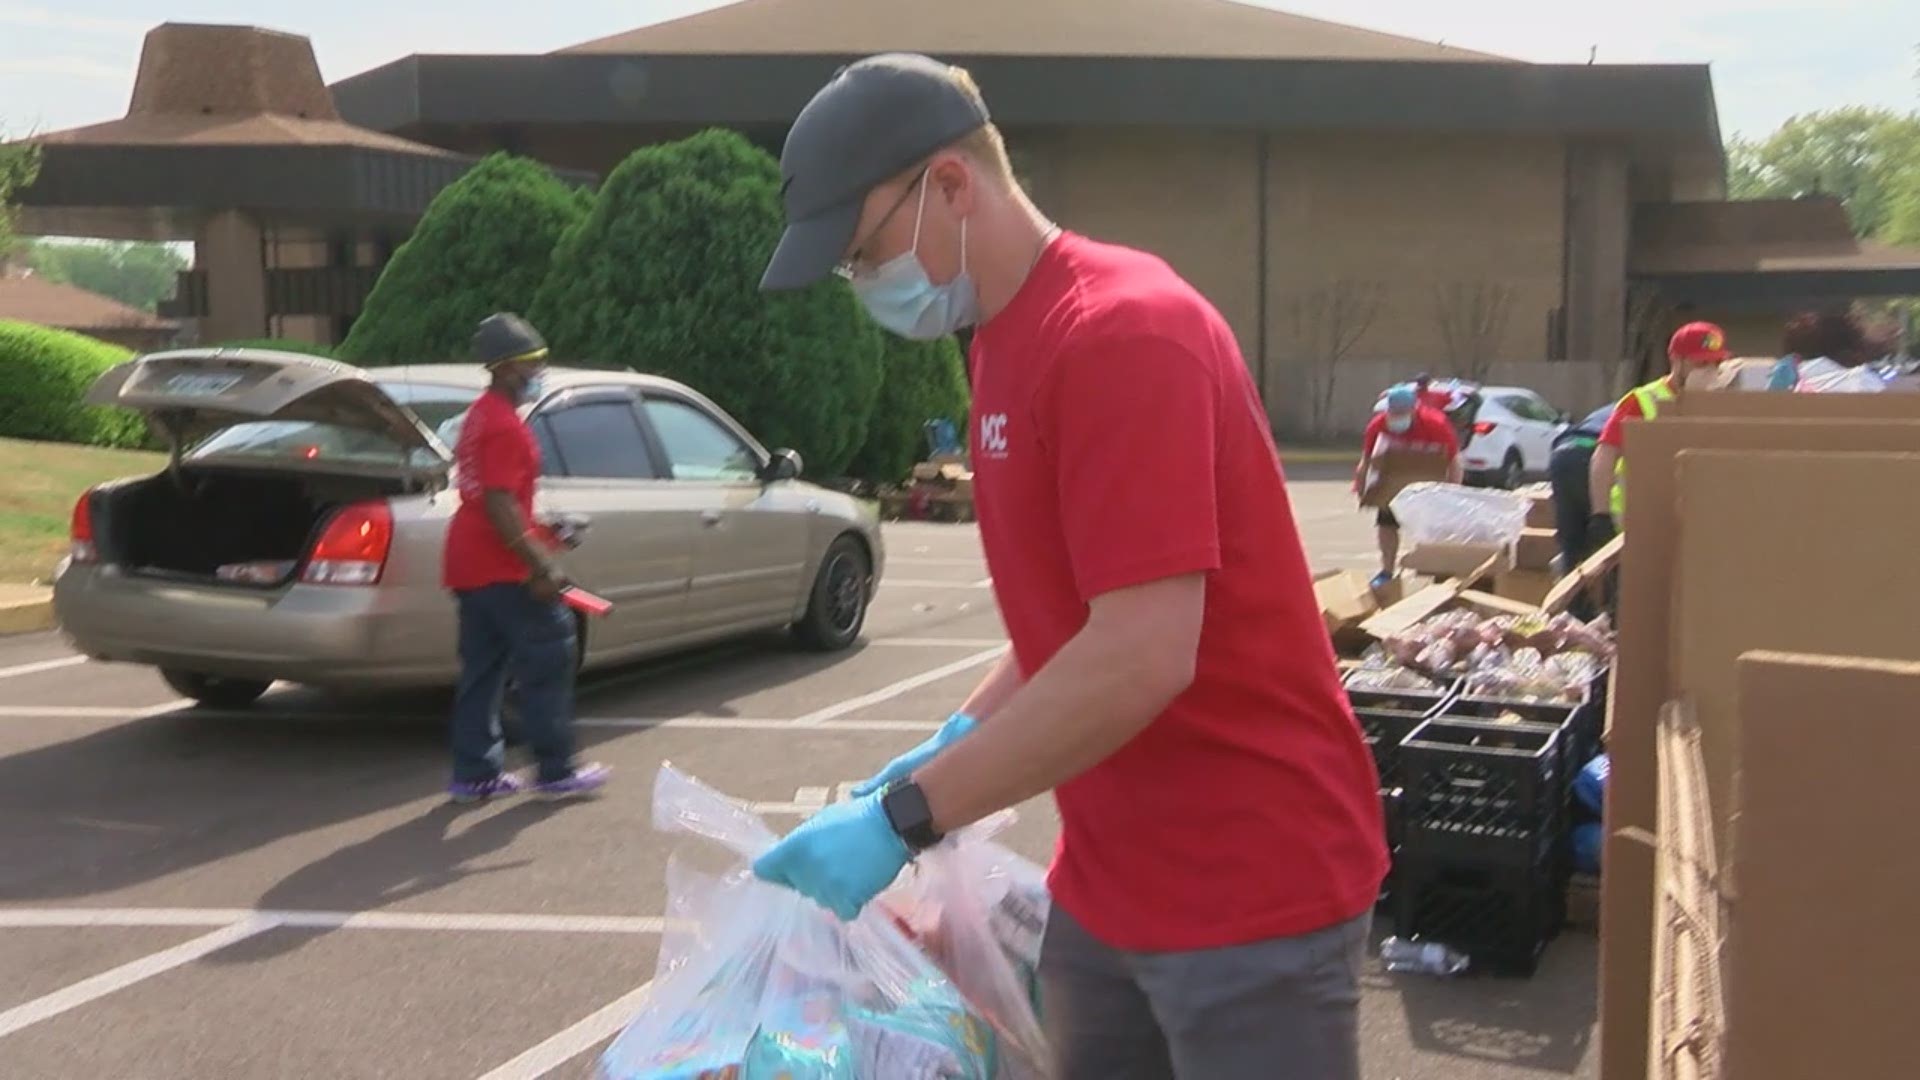 Church organizers say they will continue to serve food throughout the month of April.